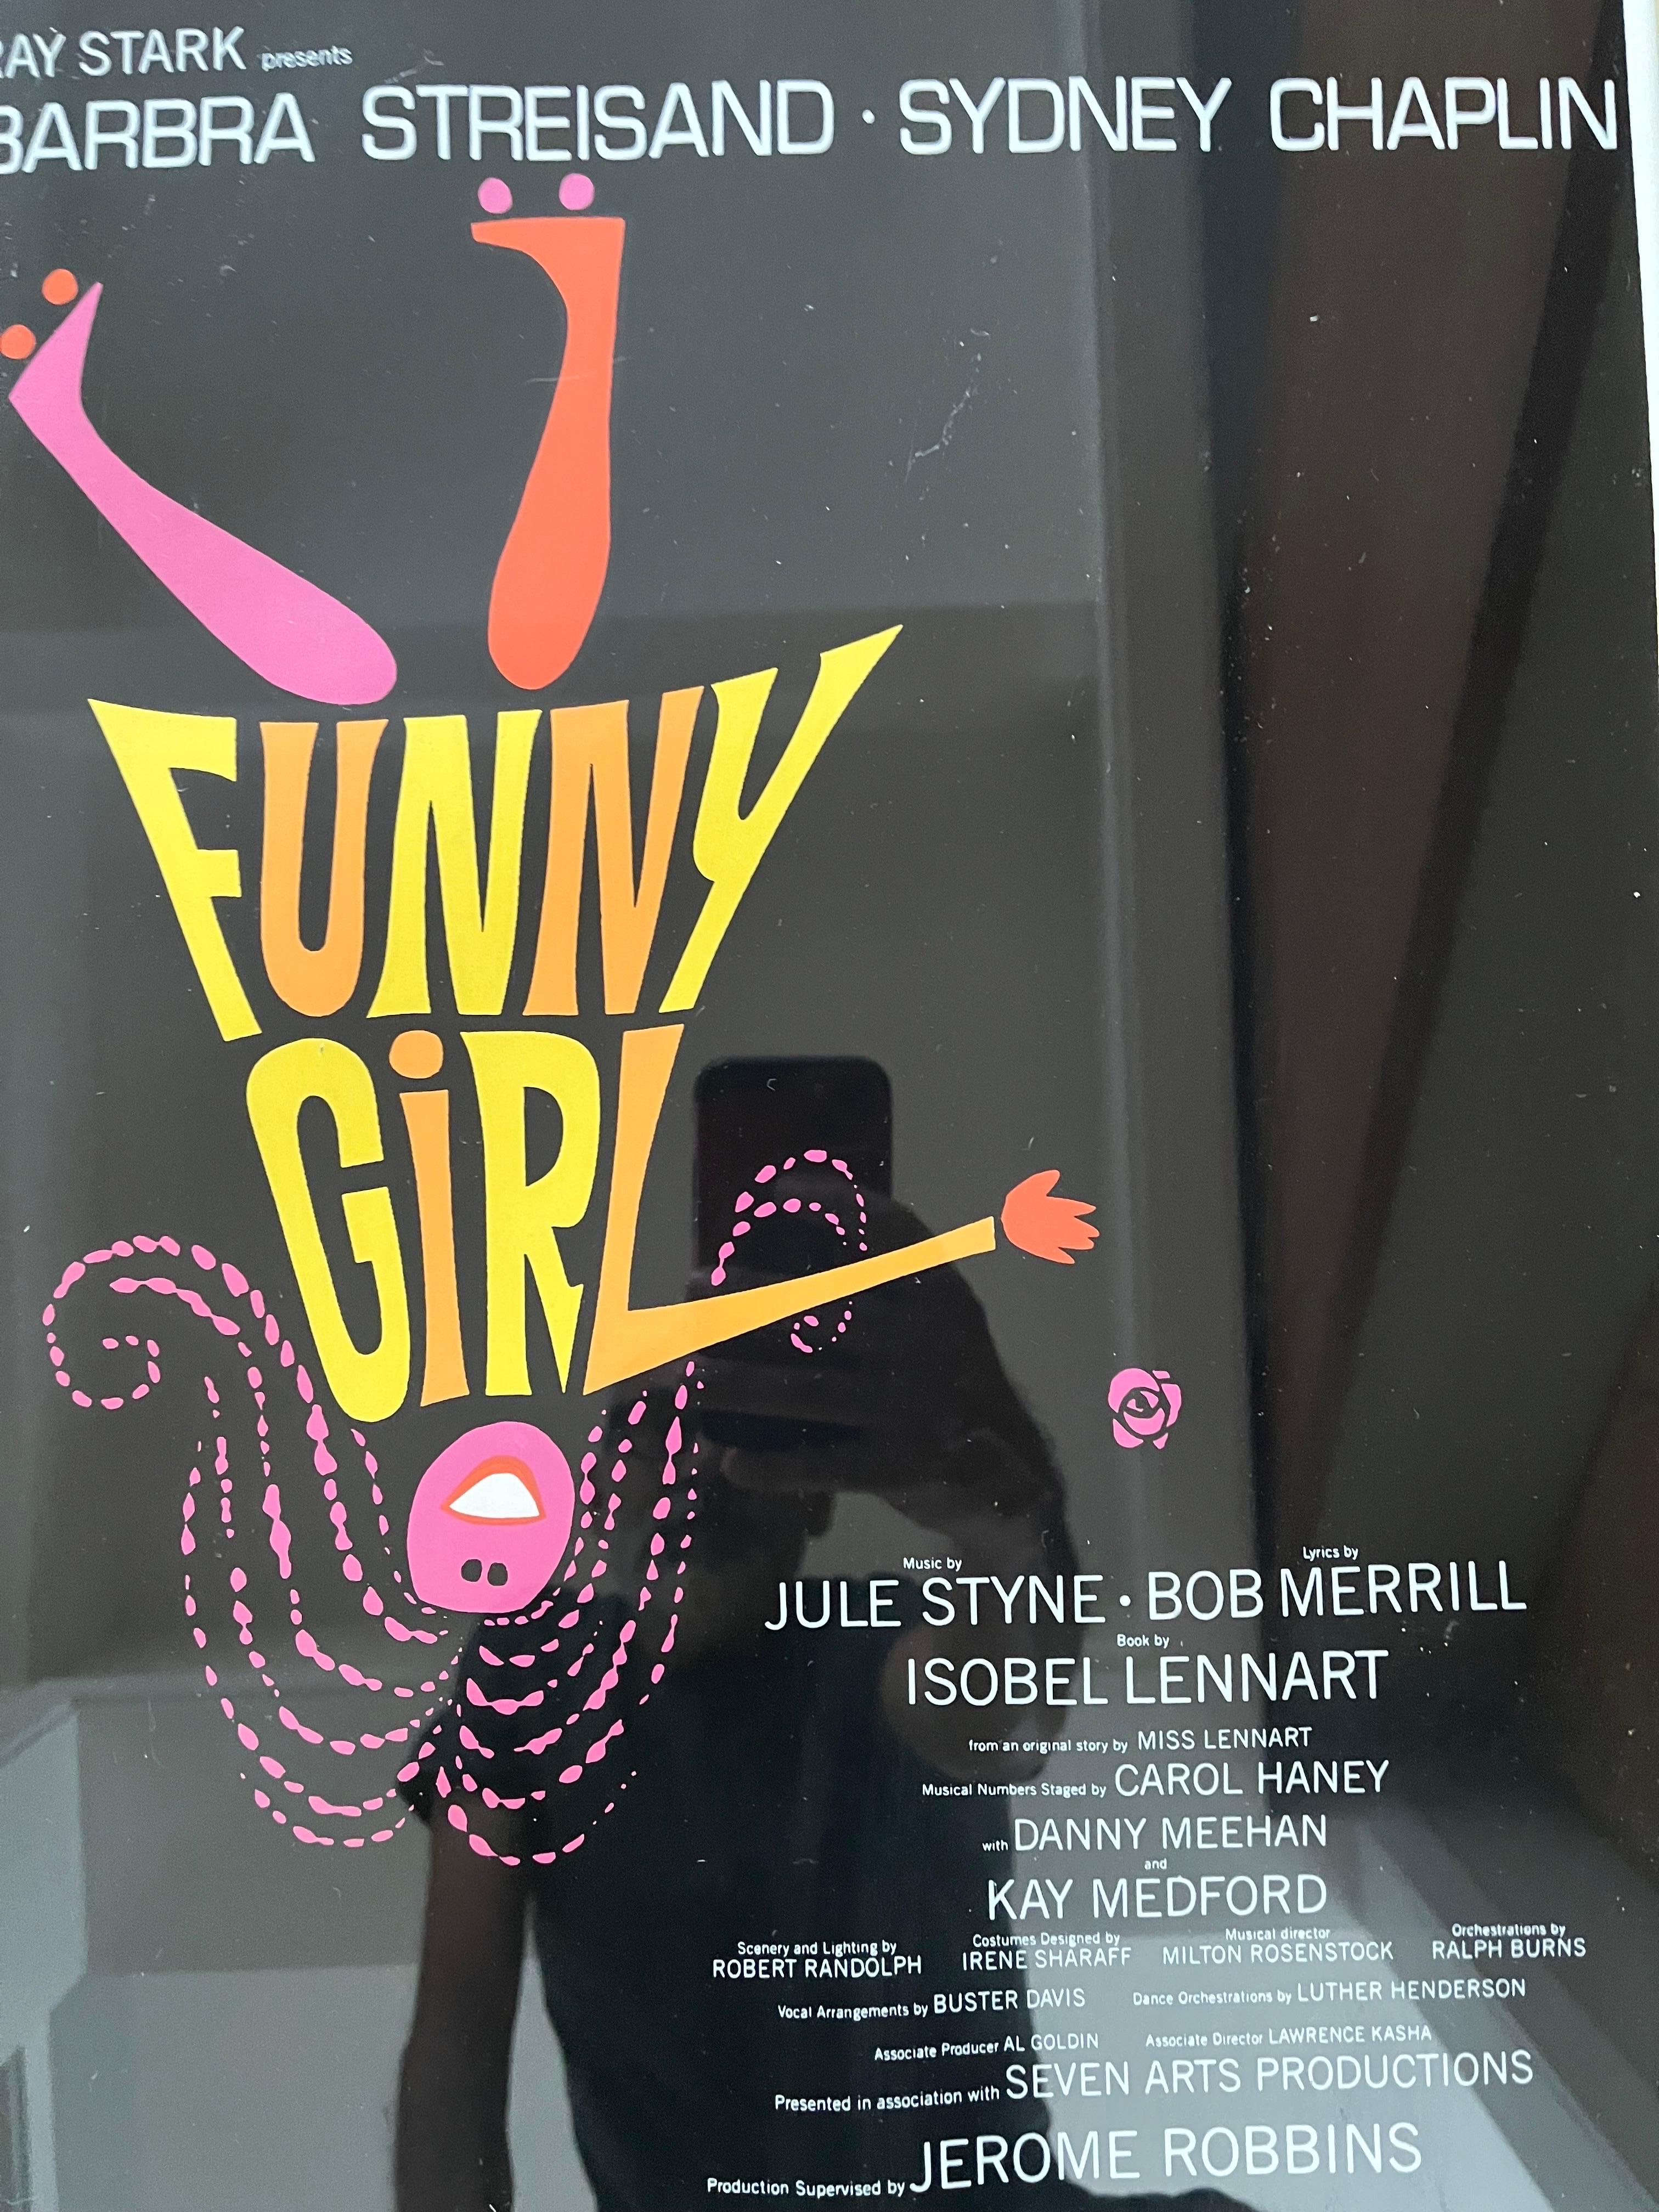 An original vintage theatrical window card stage play poster for funny girl. The 1964-1967 Garson Kanin Broadway musical stage play production starring Barbra Streisand and Sydney Chaplin.

In general good condition.
Needs to be reframed.